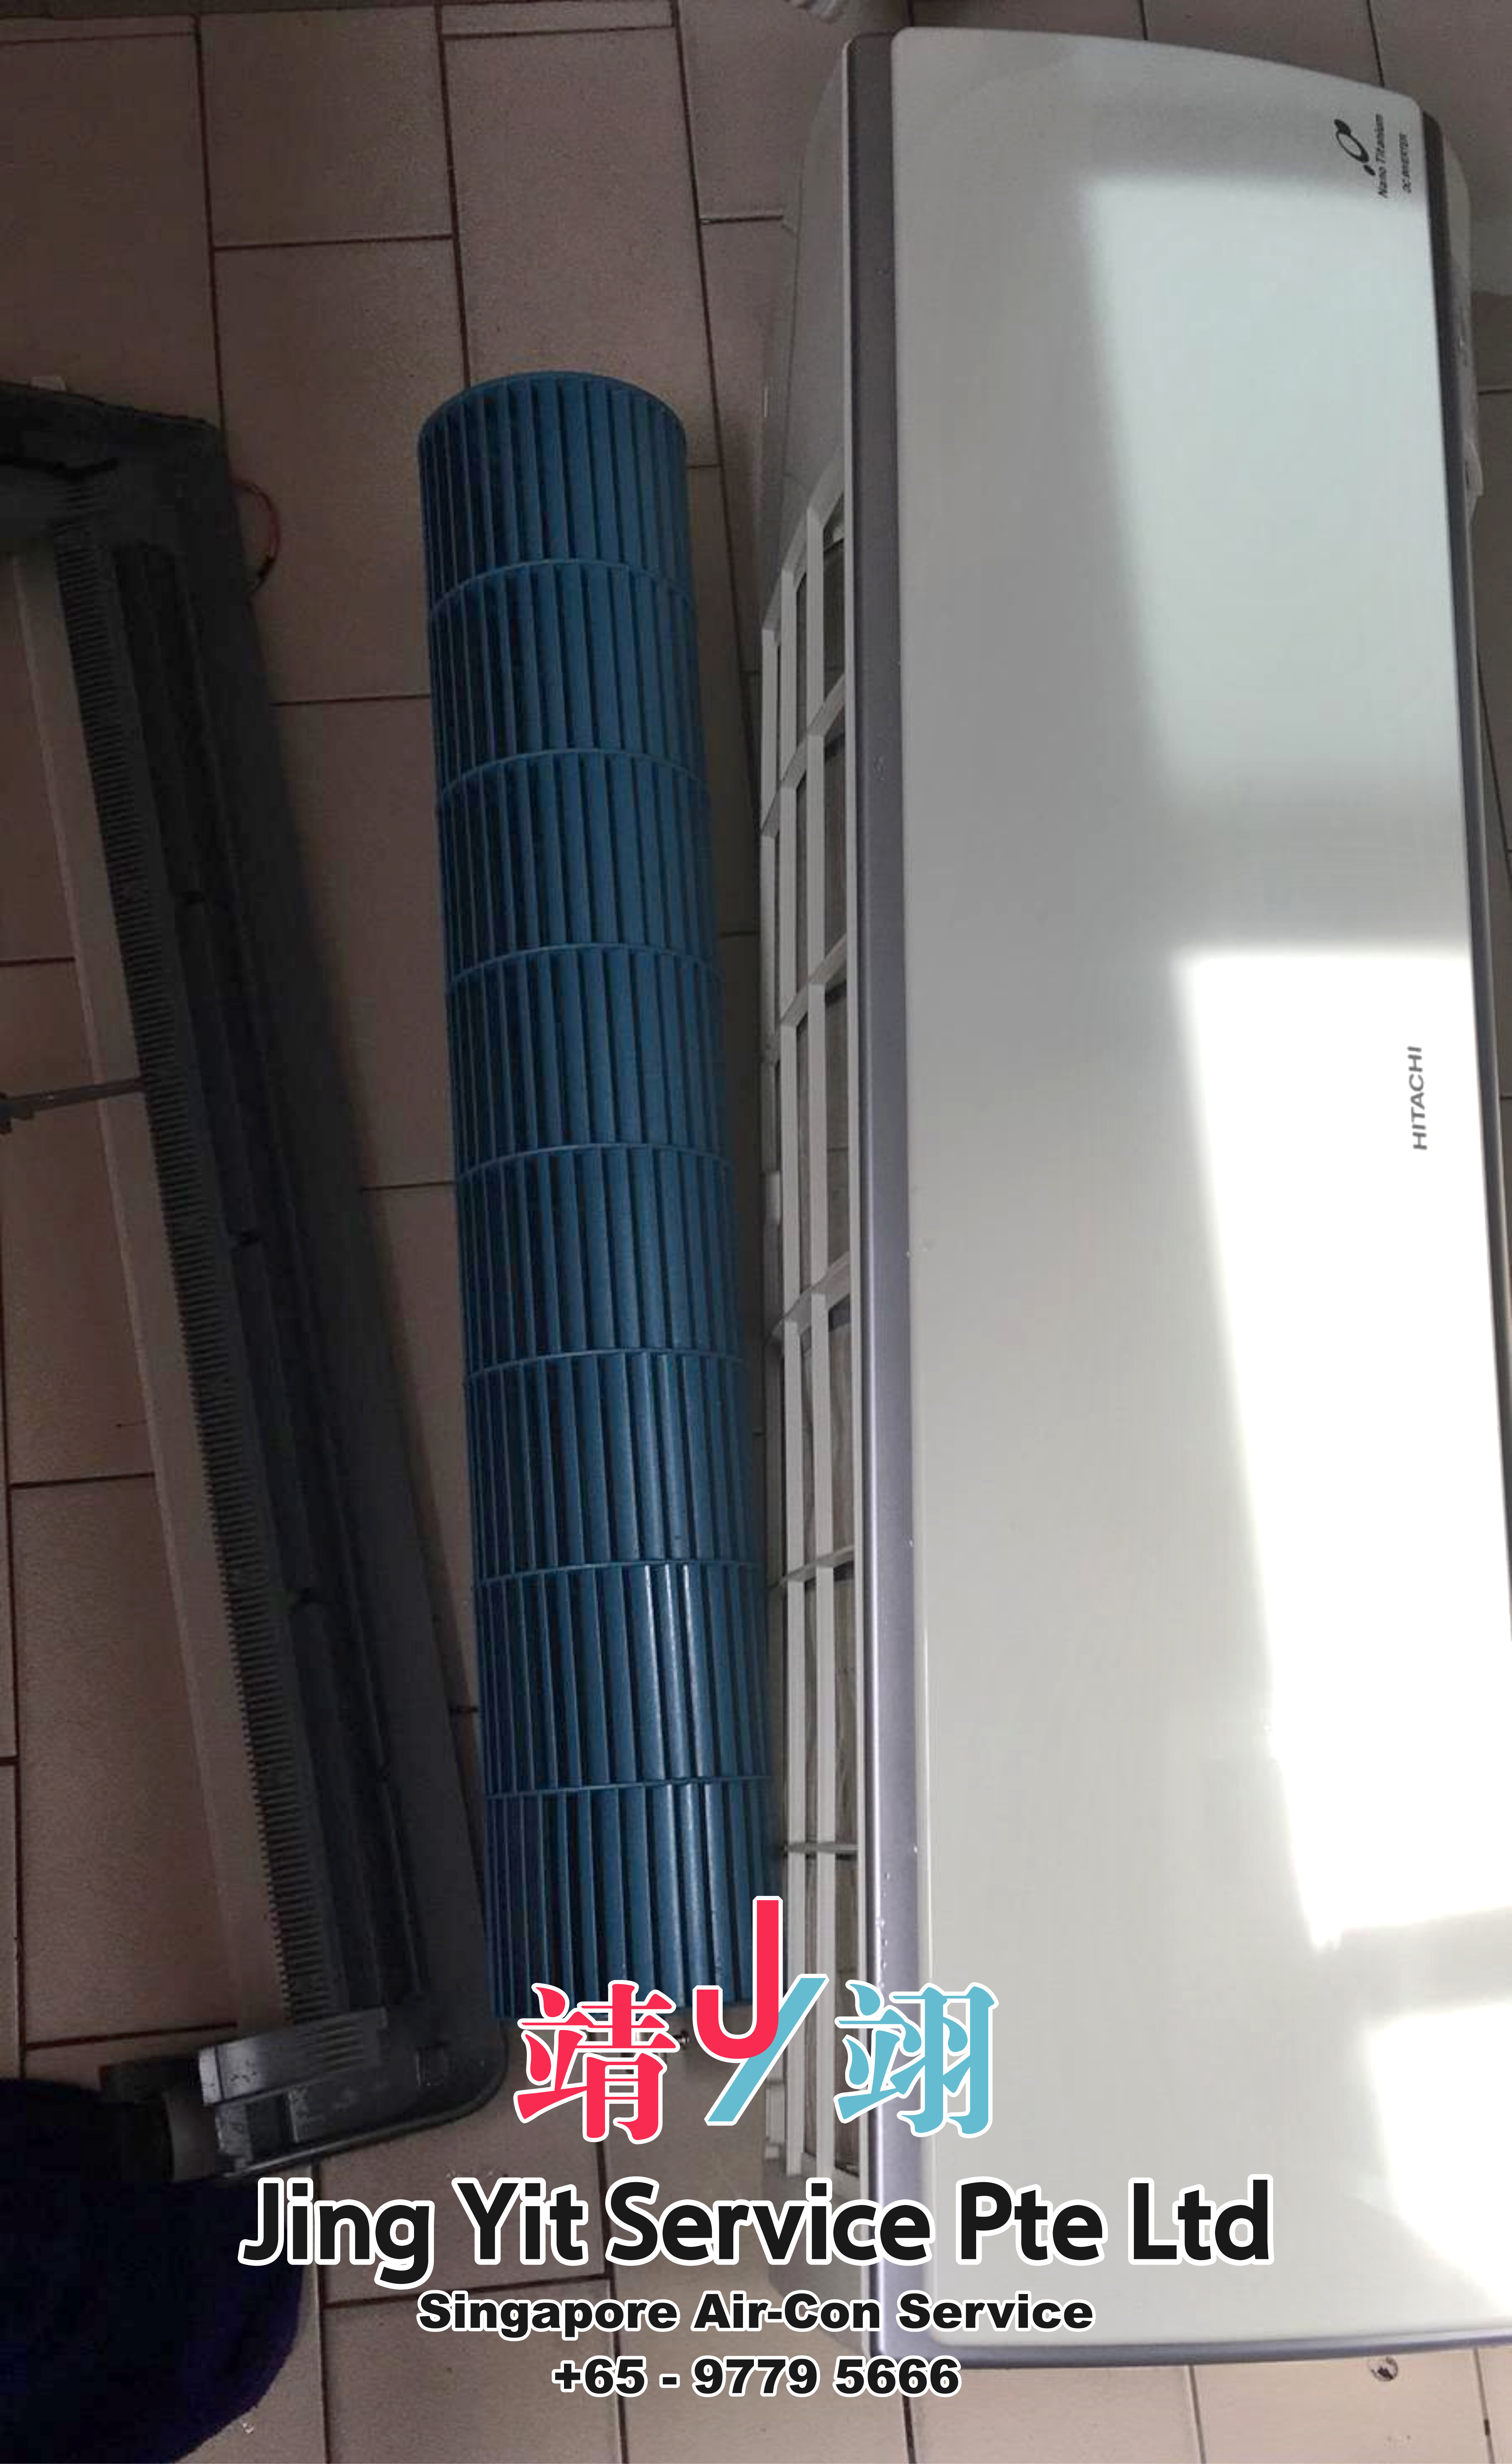 Singapore AirCon Service Air Conditioning Cleaning Repairing and Installation Air-con Gas Refill Aircon Chemical Wash Singapore Jing Yit Service Pte Ltd A02-19